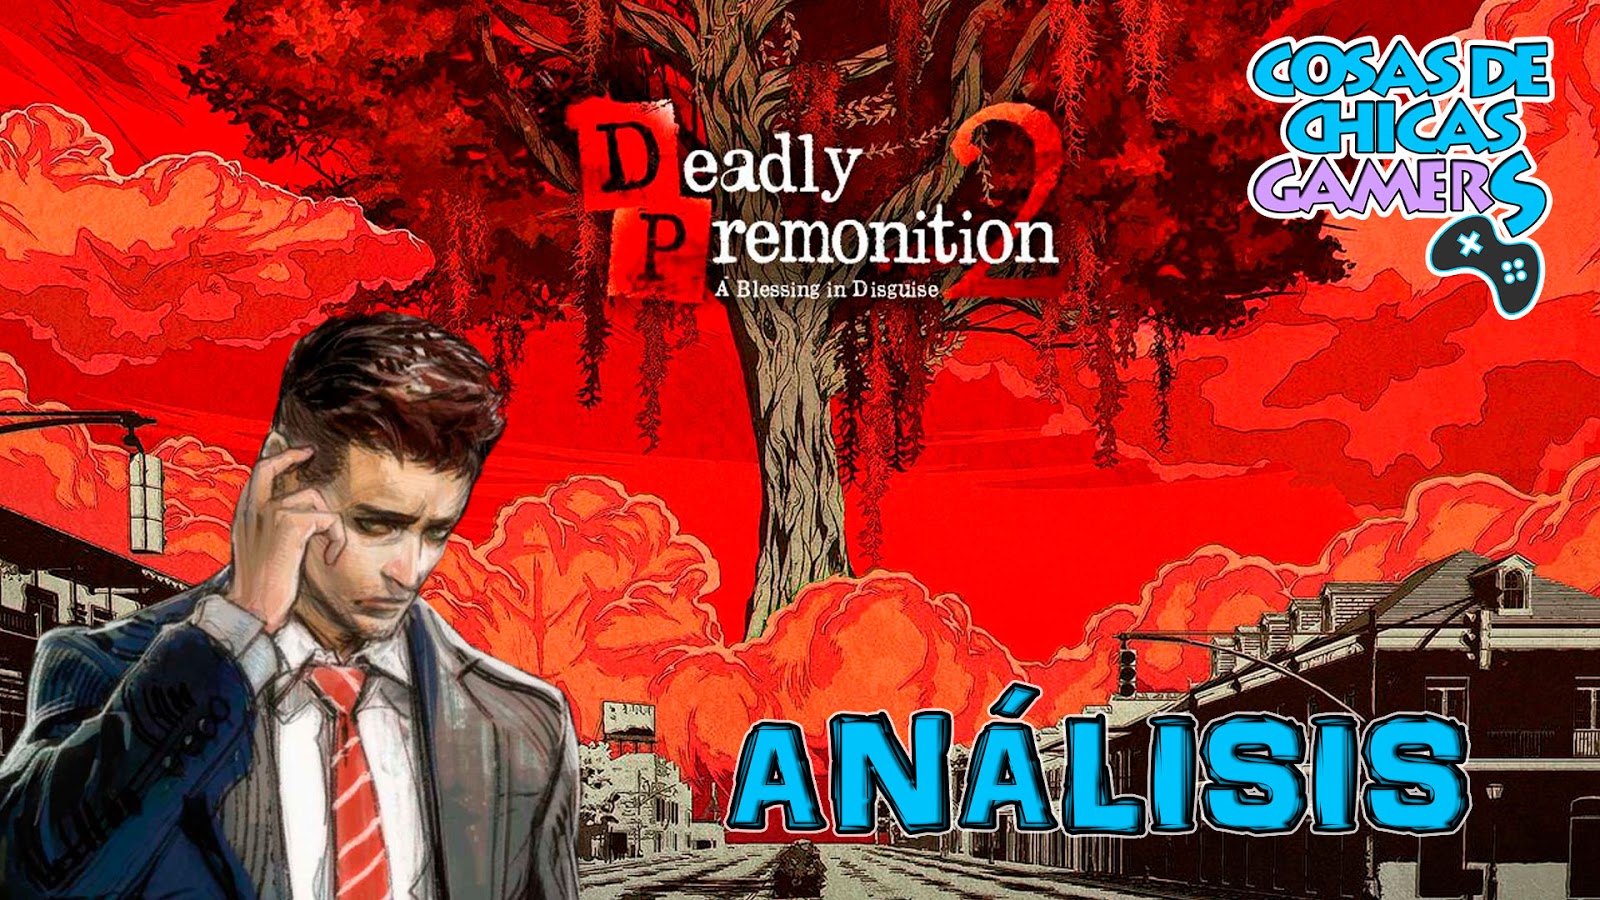 DEADLY PREMONITION 2: A BLESSING IN DISGUISE - ANÁLISIS EN NINTENDO SWITCH  | Cosas de Chicas Gamers